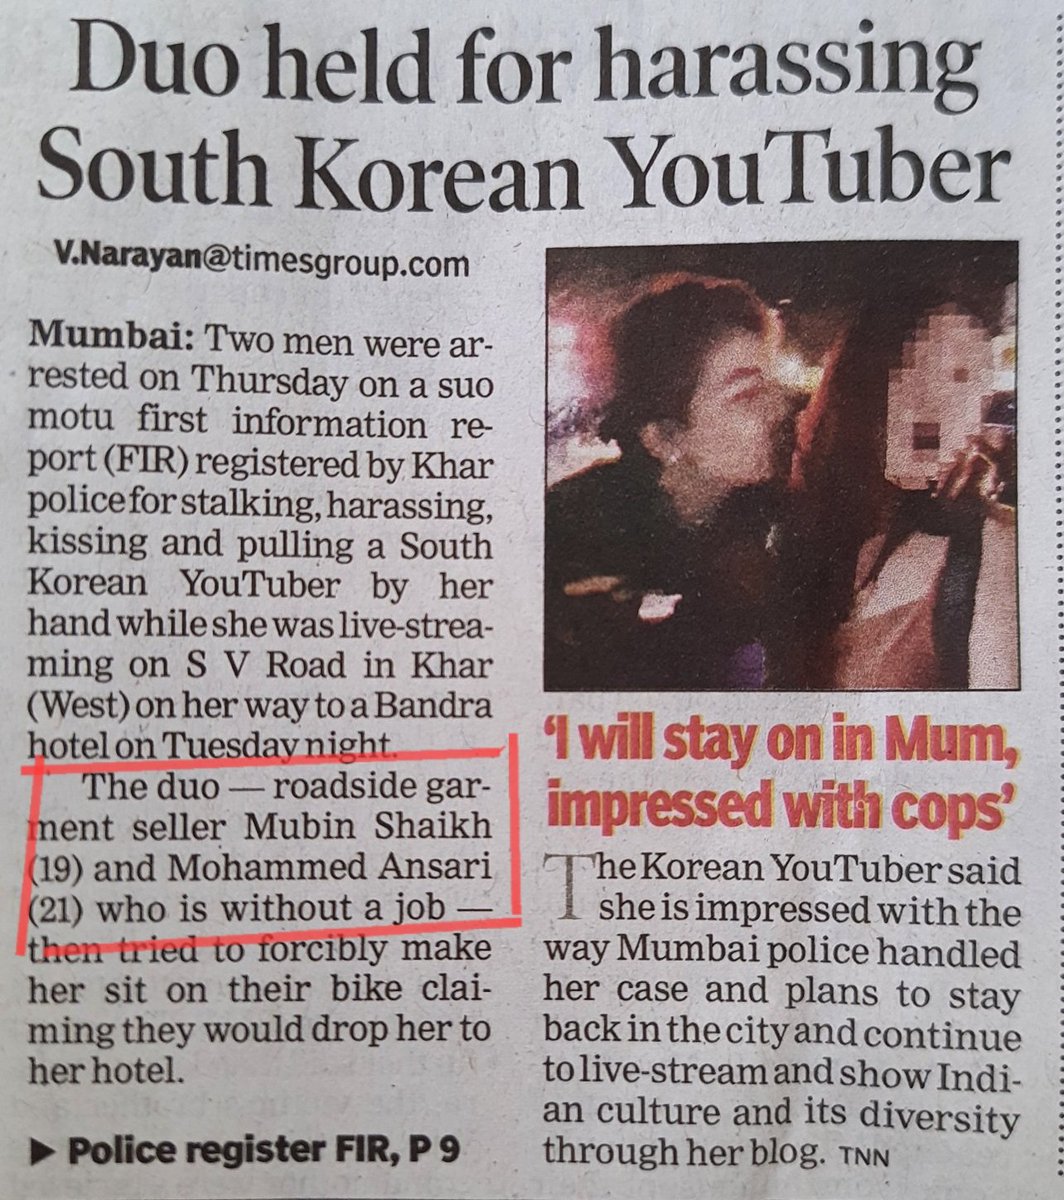 @imMAK02 That's why the outrage is for , this news made headlines which read korean youtuber harassed by indian men ,why should innocent people shamed for act of some ,no one forced them to leave ,they left voluntarily, it's an act to demean hindus of devbhoomi